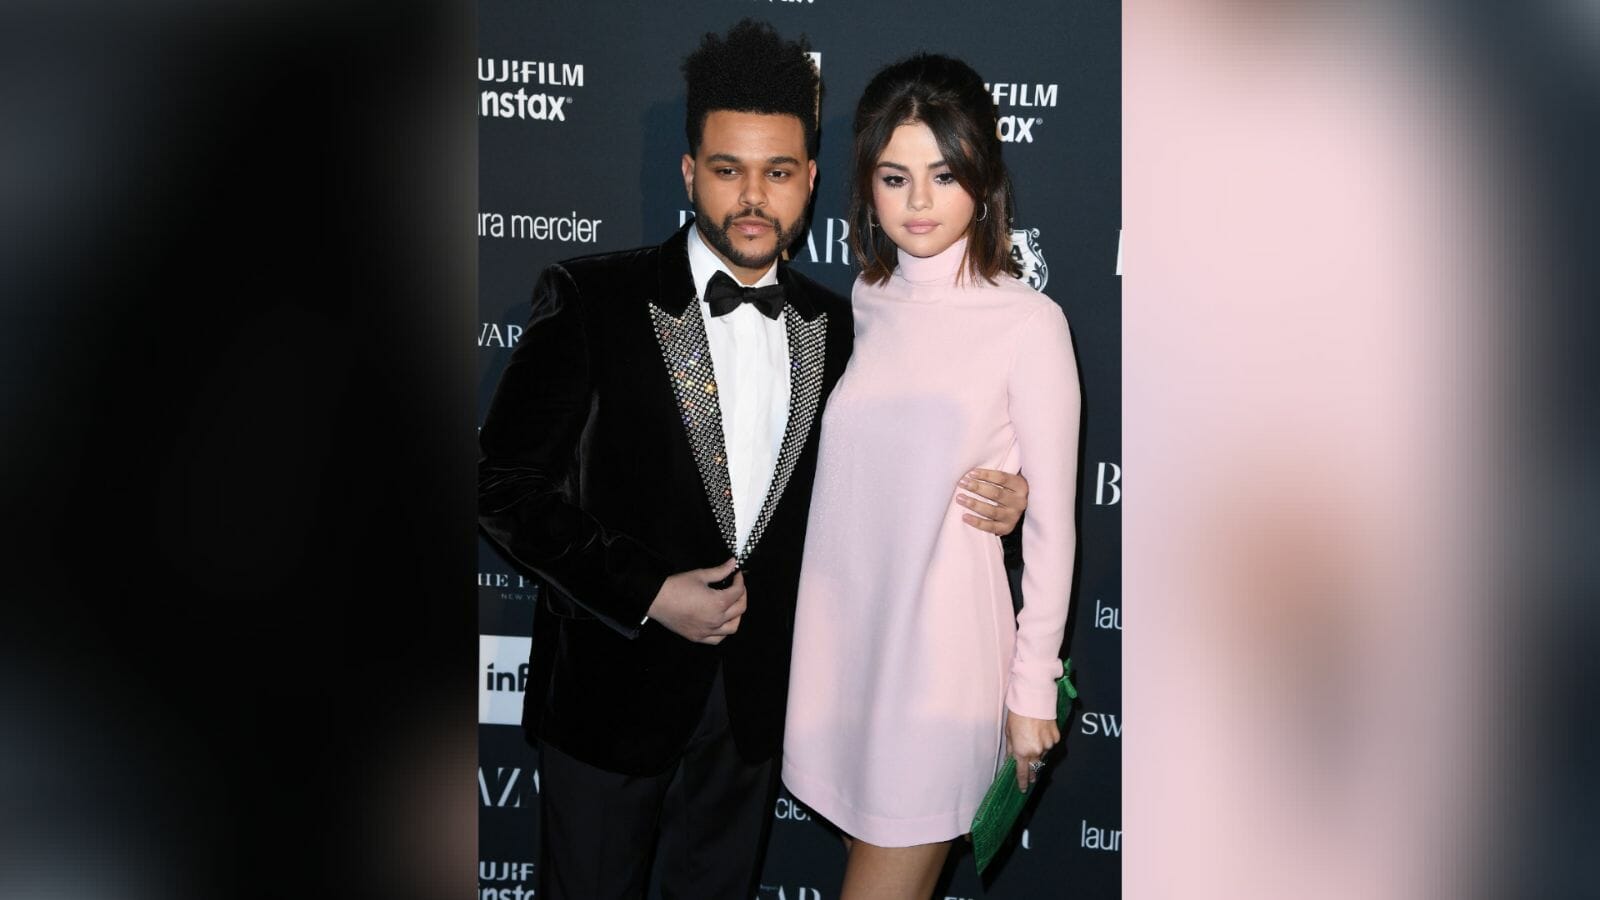 The Weeknd and Selena